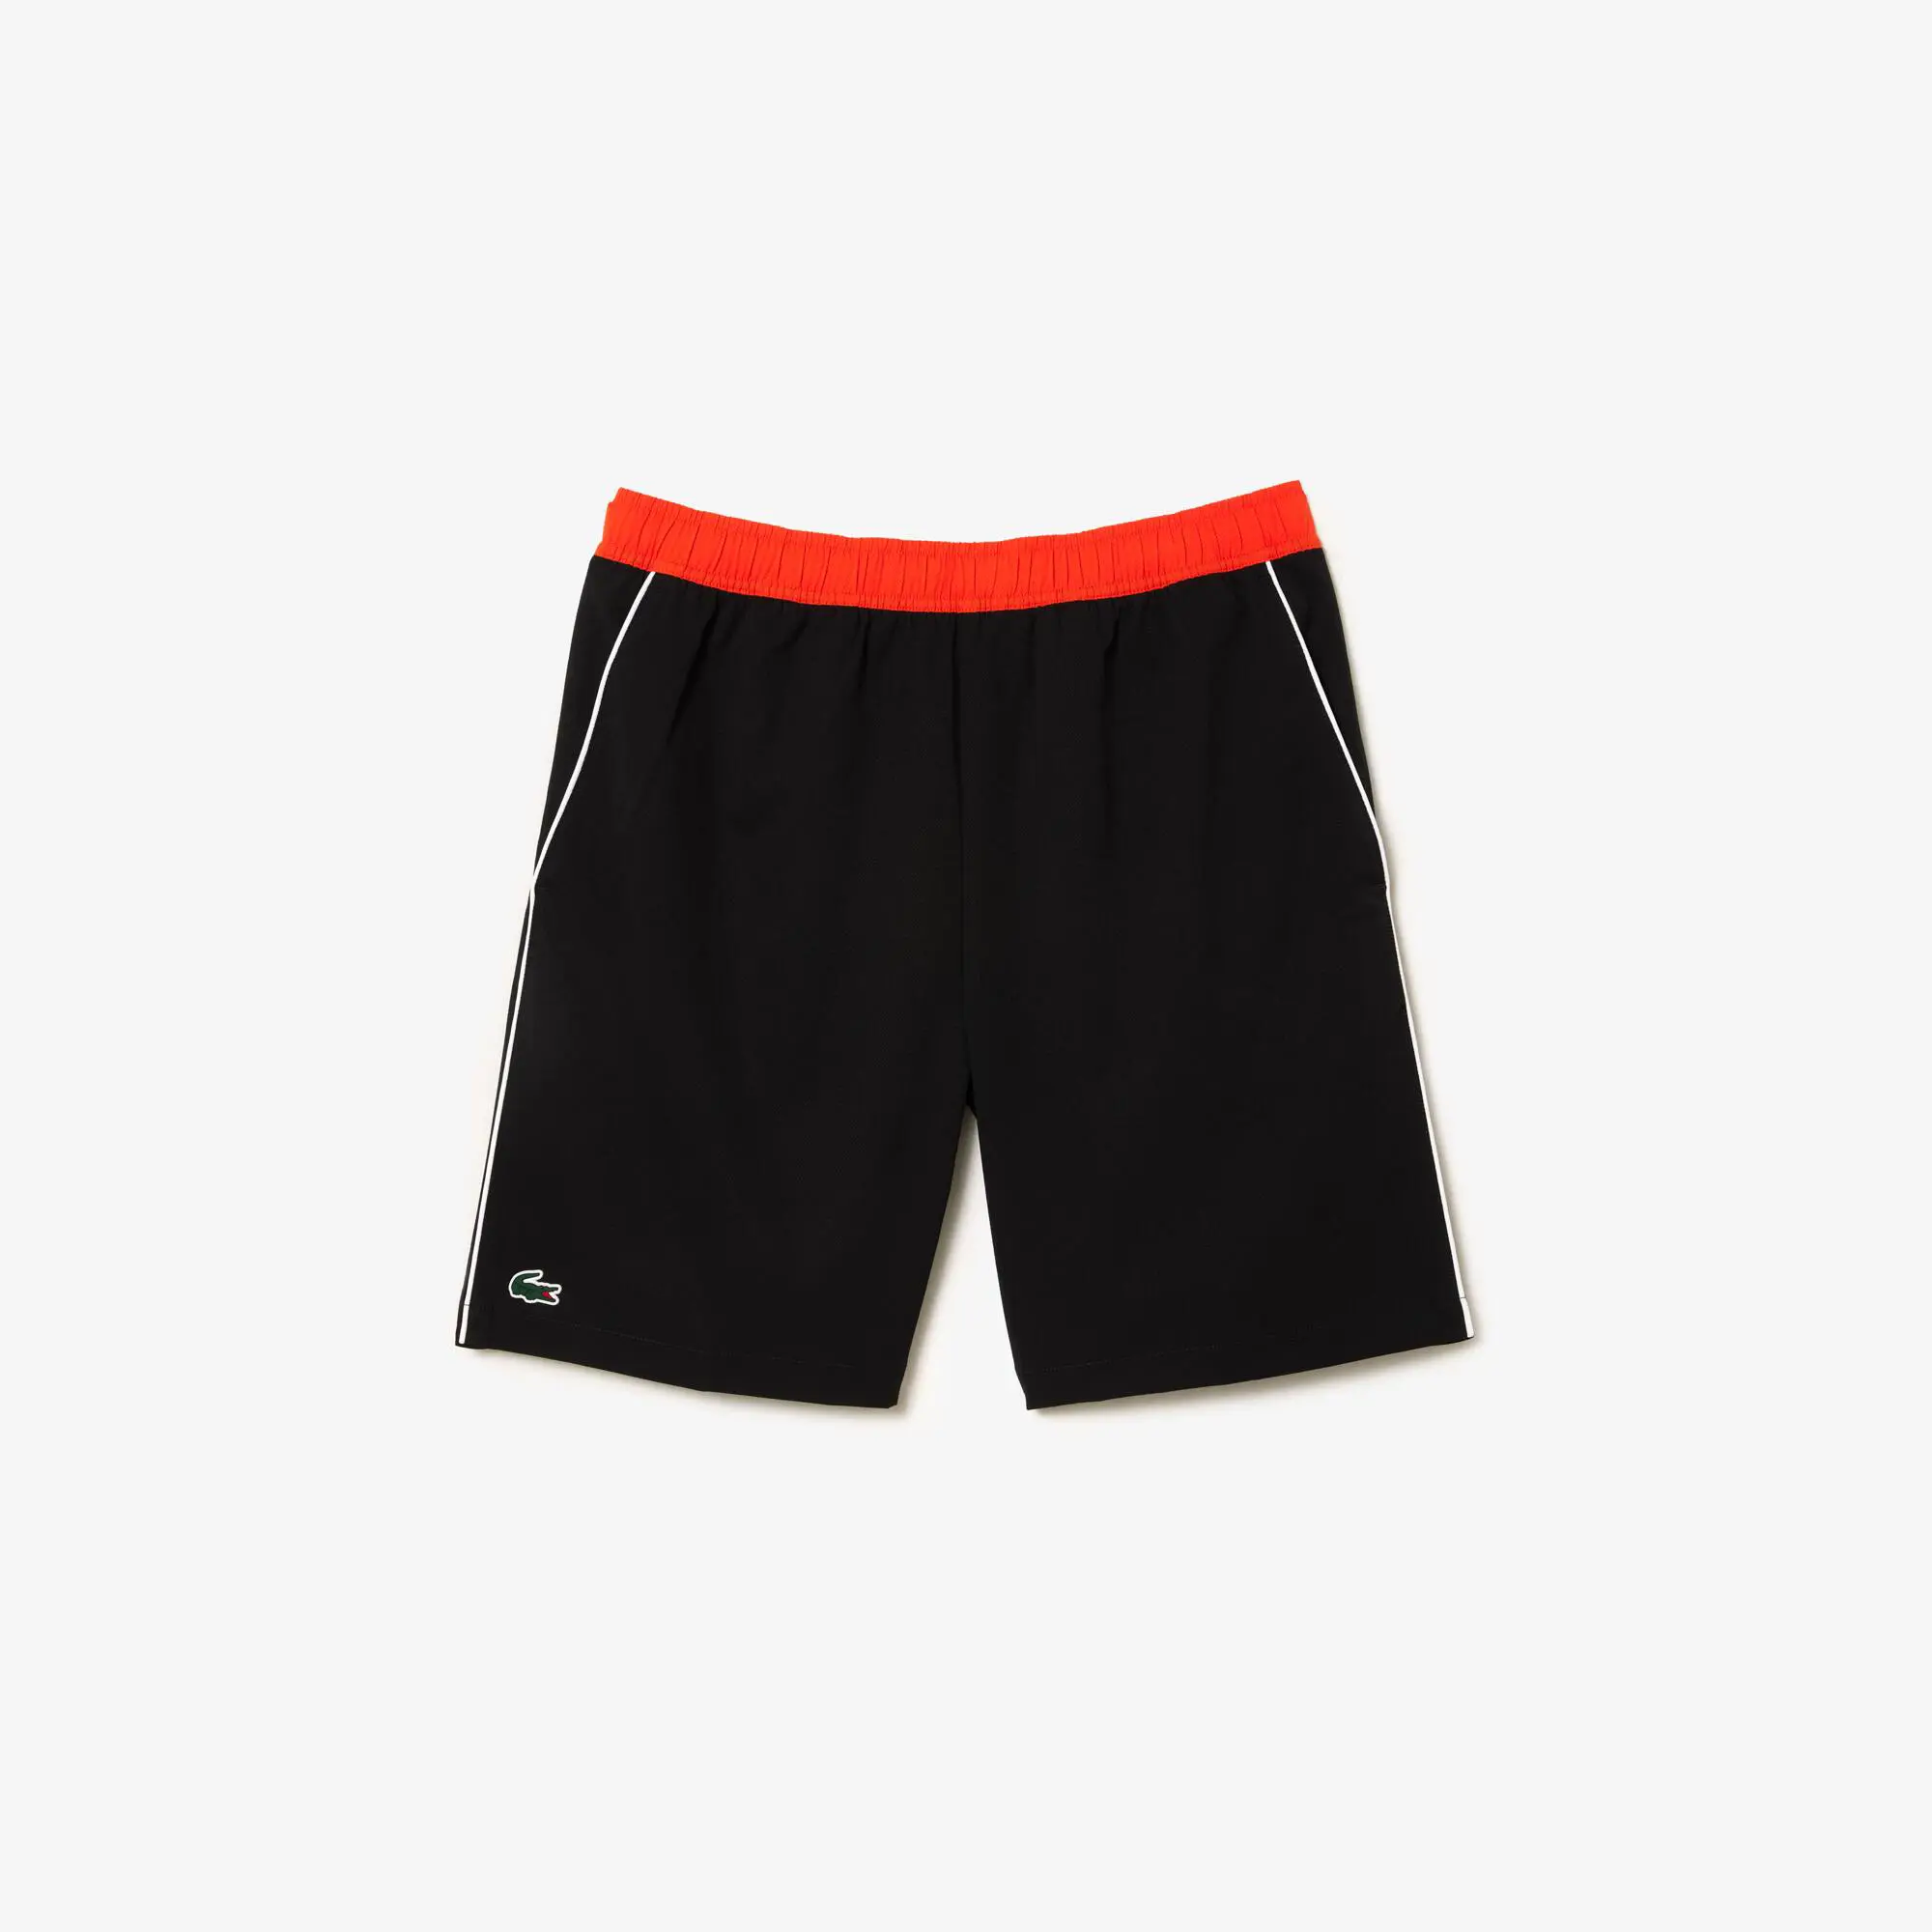 Lacoste Recycled Fabric Stretch Tennis Shorts. 2